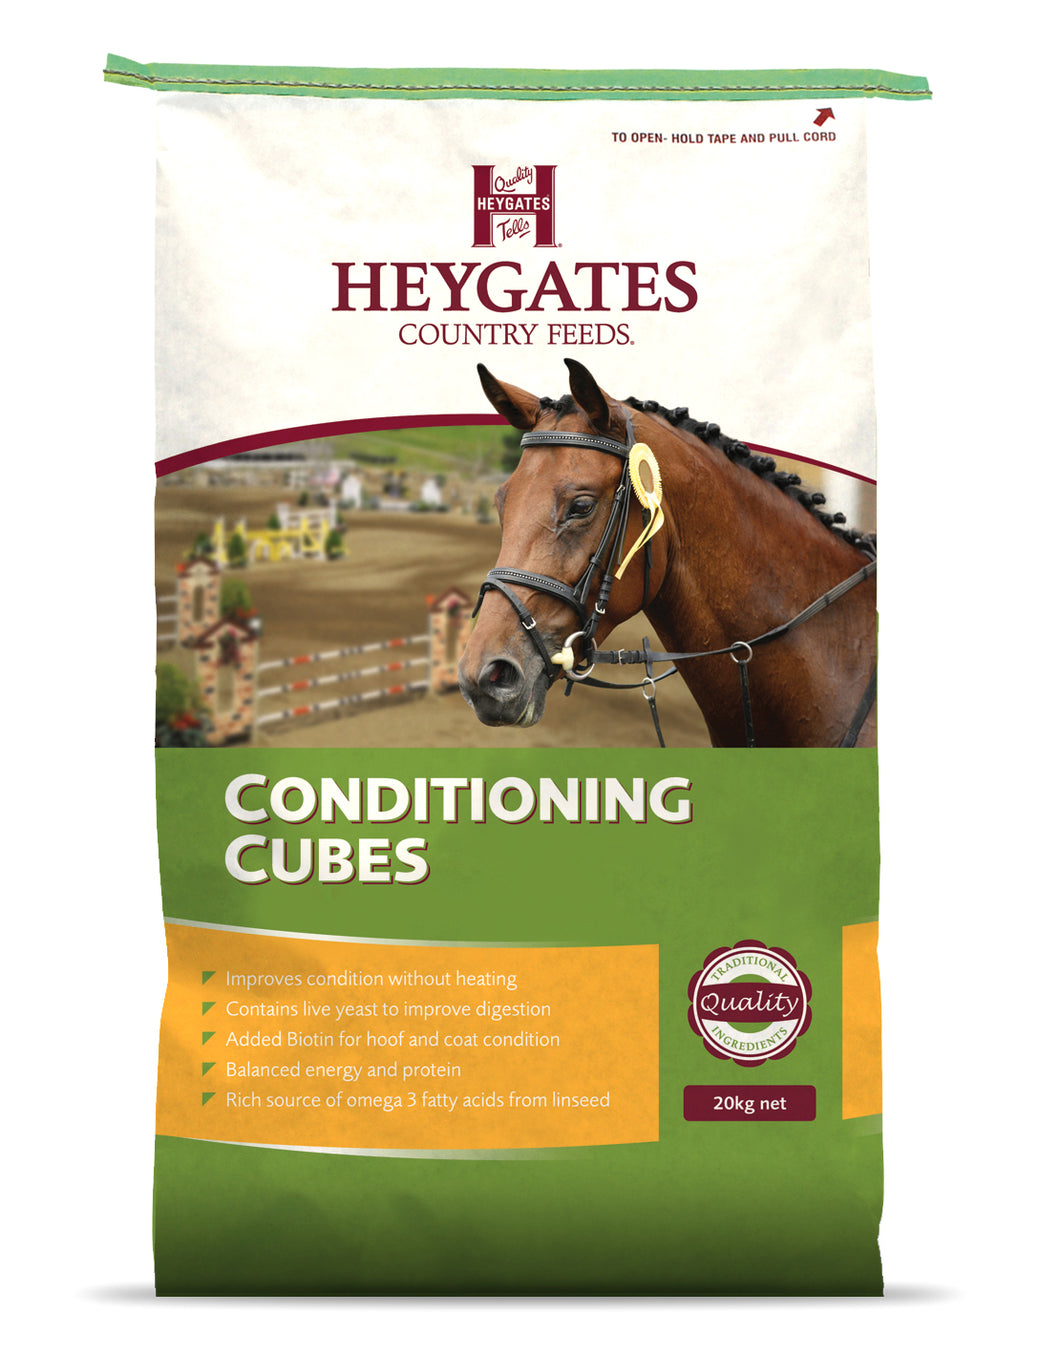 Heygates Conditioning Cubes